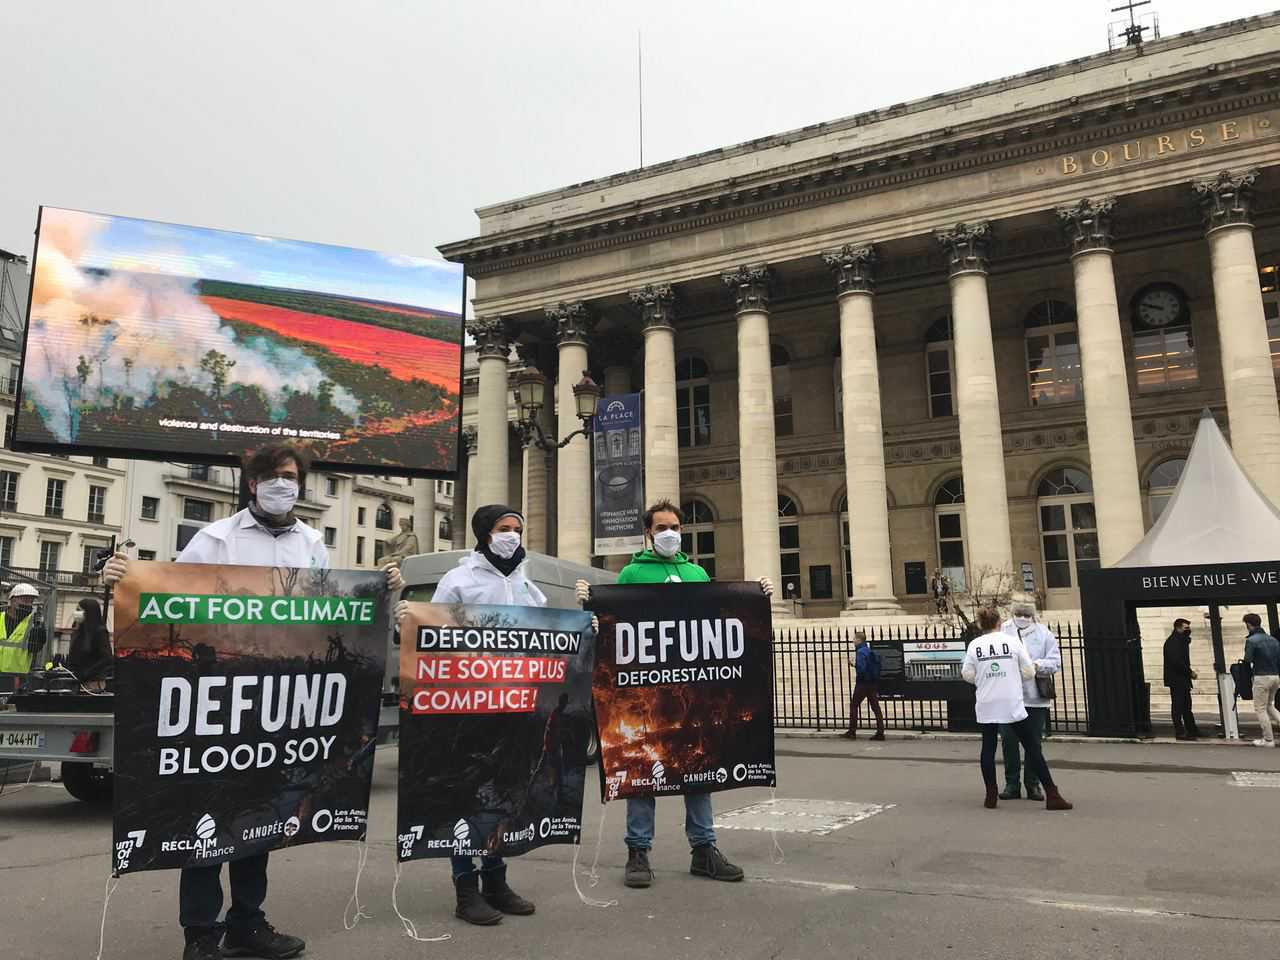 Activists from Reclaim Finance, Canopée and Friends of the Earth in front of the entrance of the Climate Finance Day event 